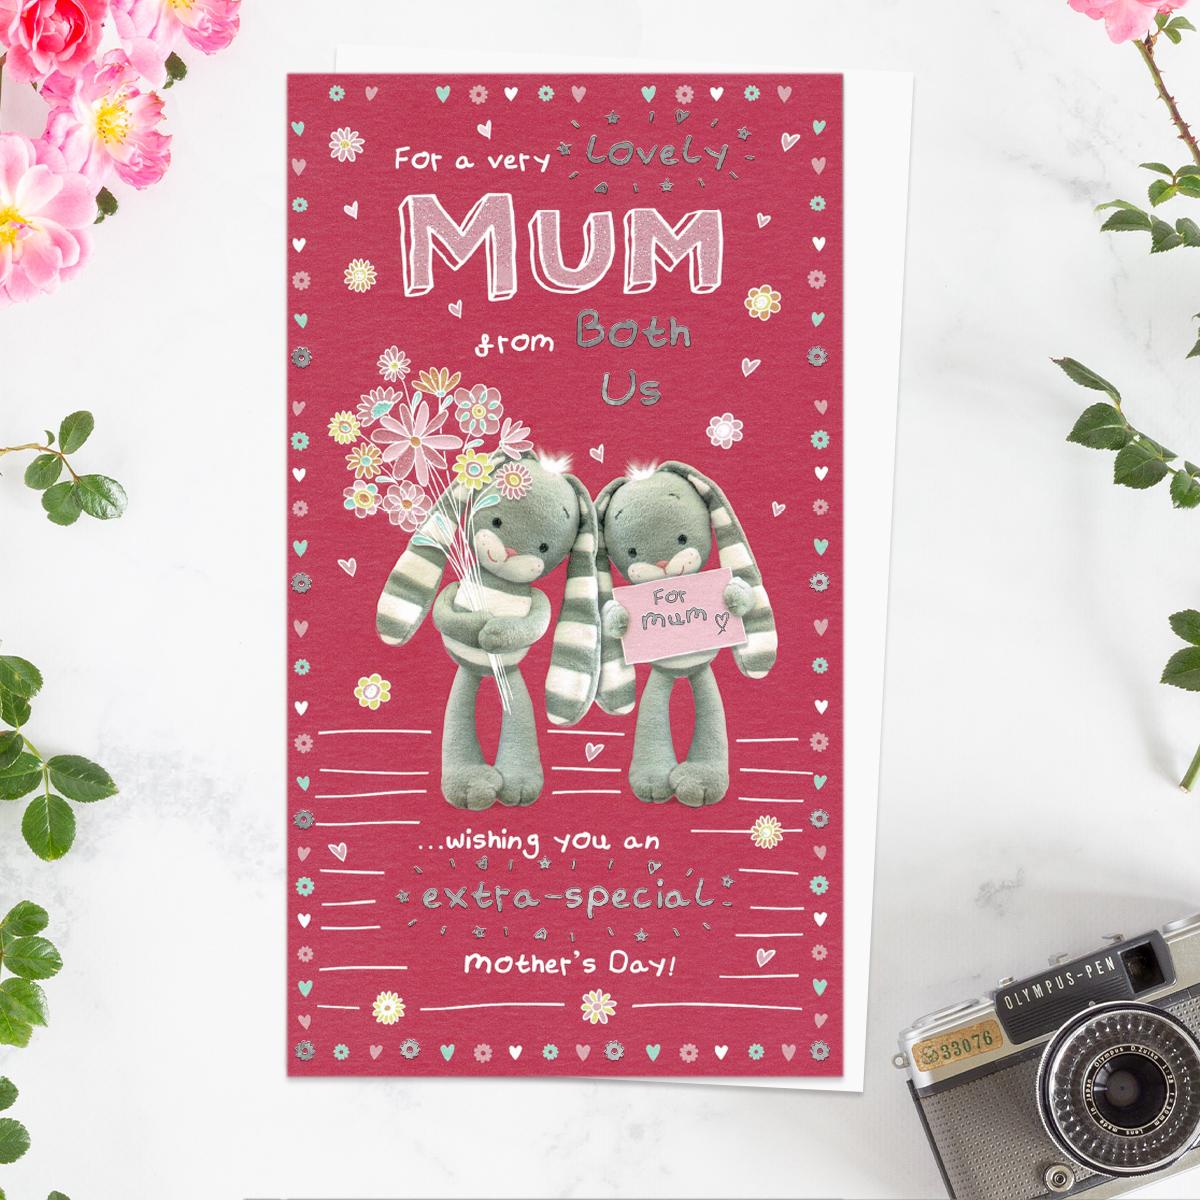 ' For A Very Lovely Mum From Both Of Us' Mother's Day Card. Featuring Hun Bun With Flowers! Complete With Silver foil Detail and White Envelope With Pink Hearts